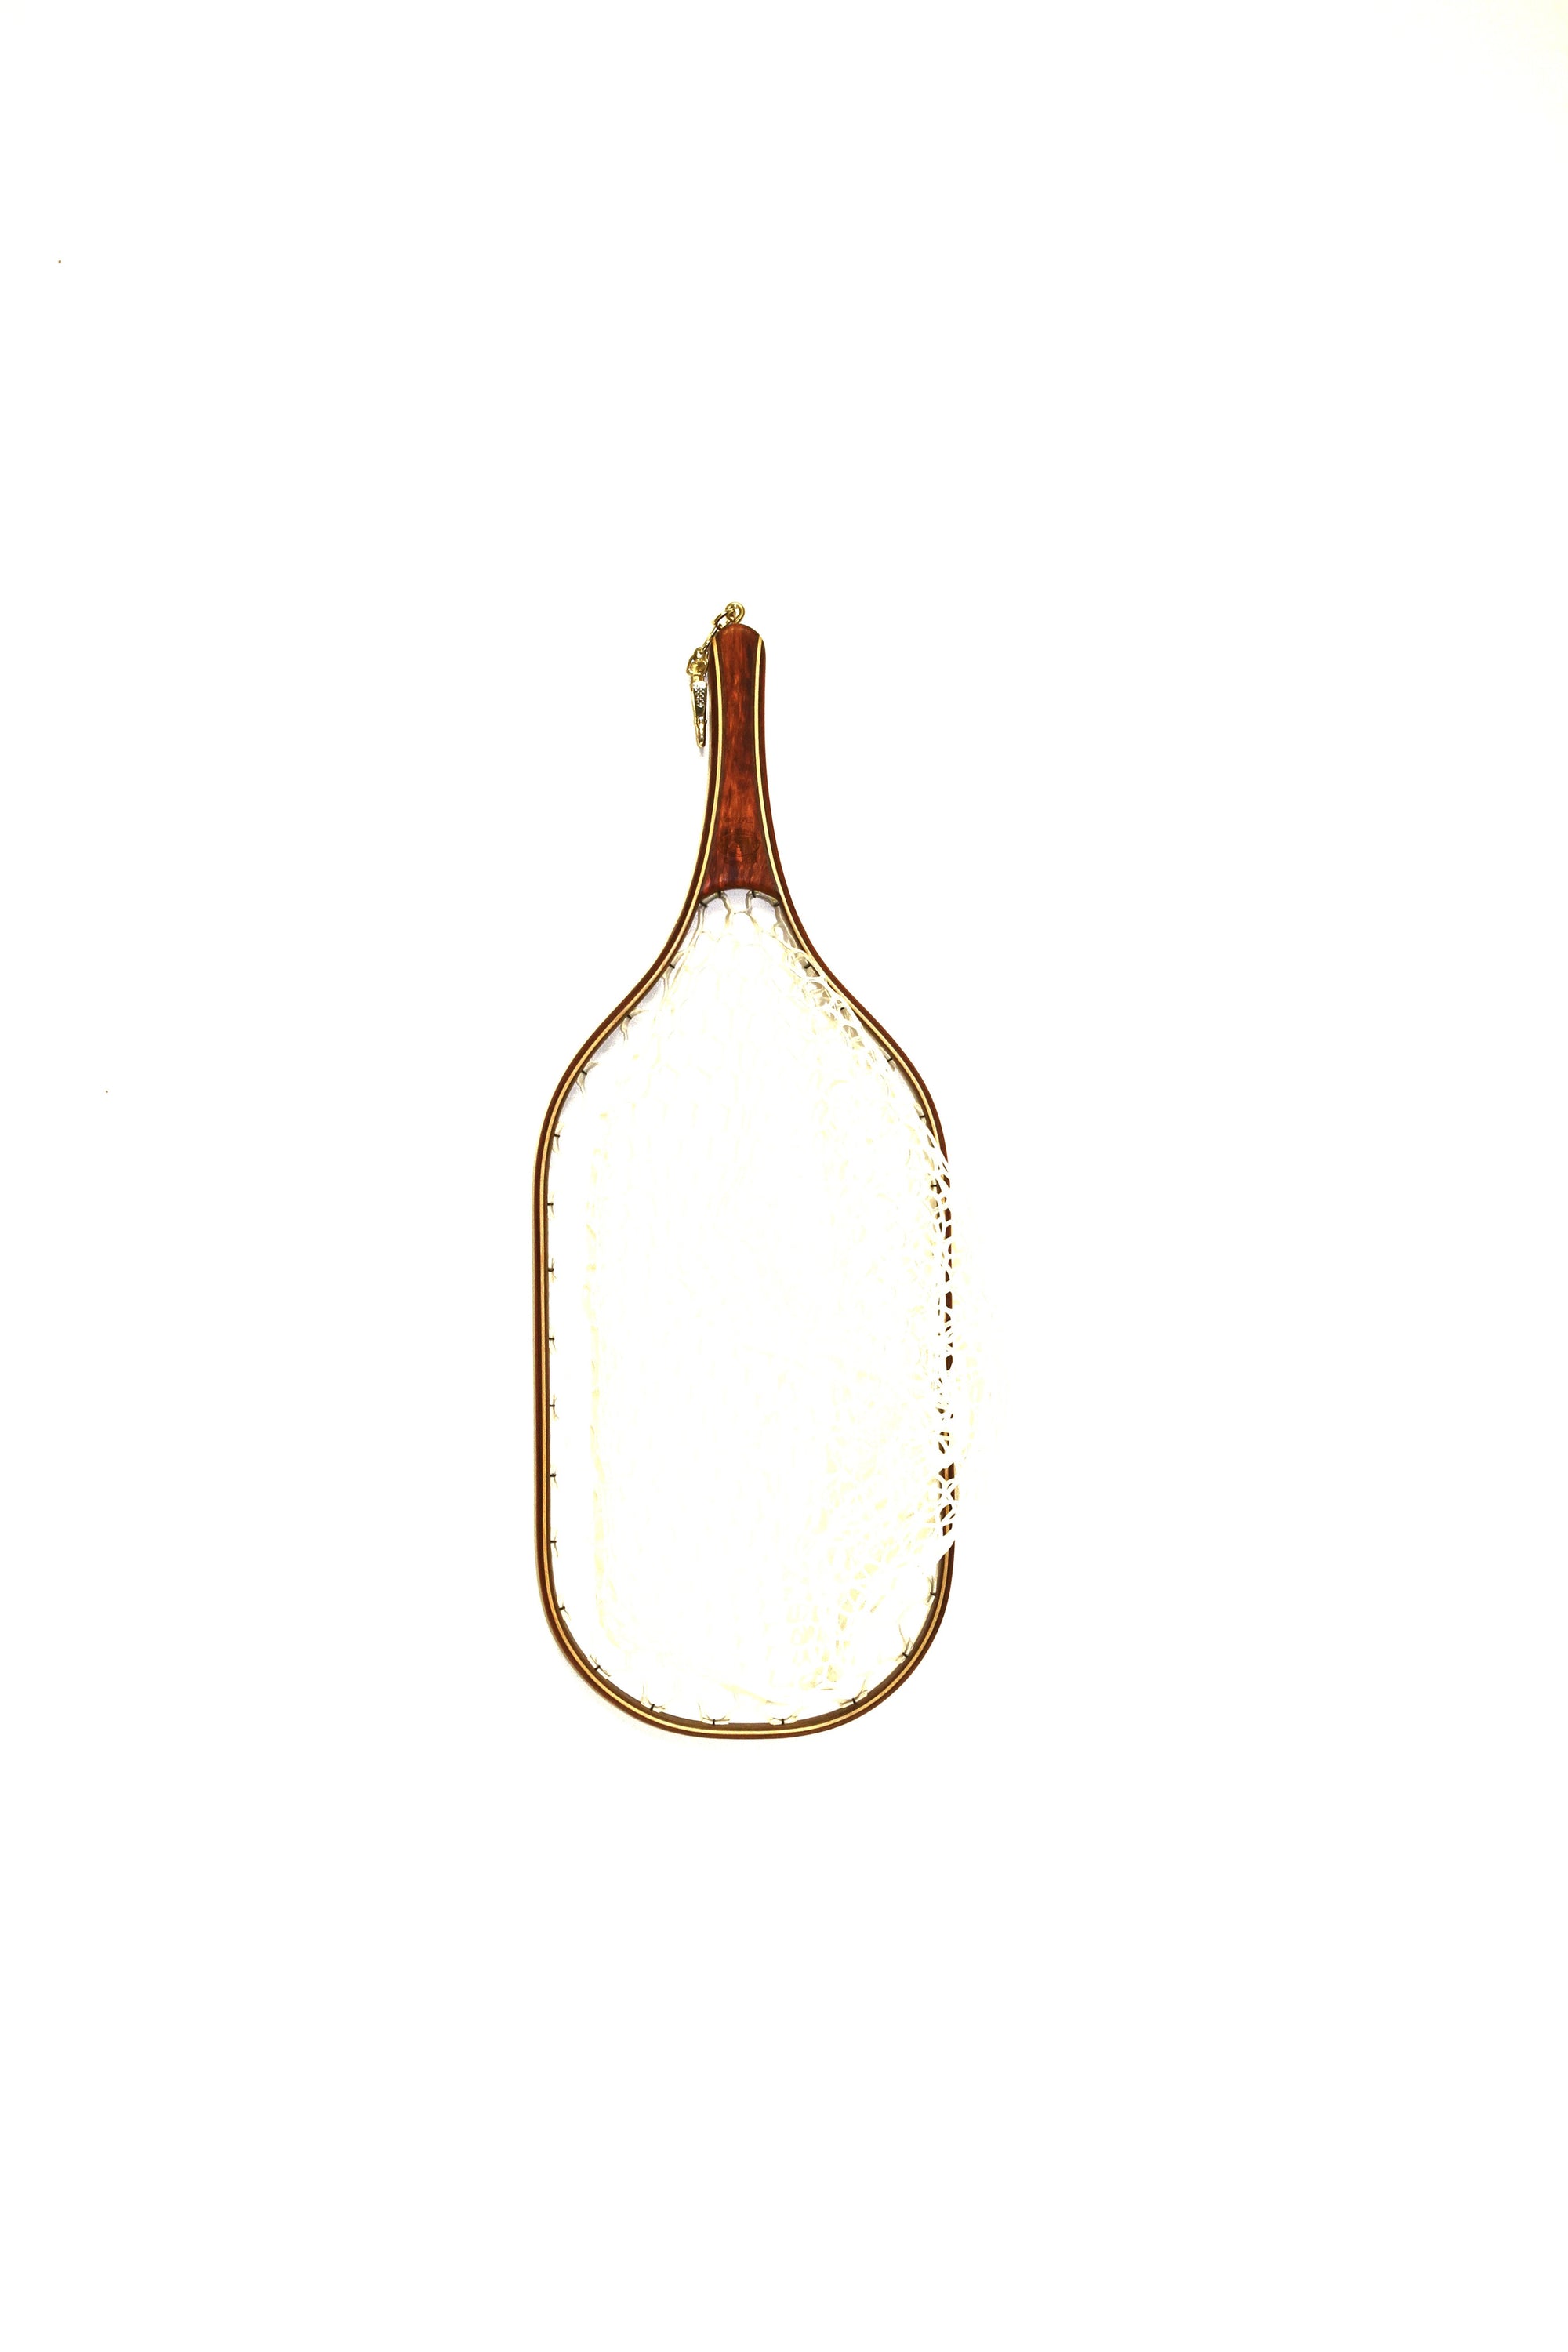 Rushton Catch & Release Nets - Iron Bow Fly Shop